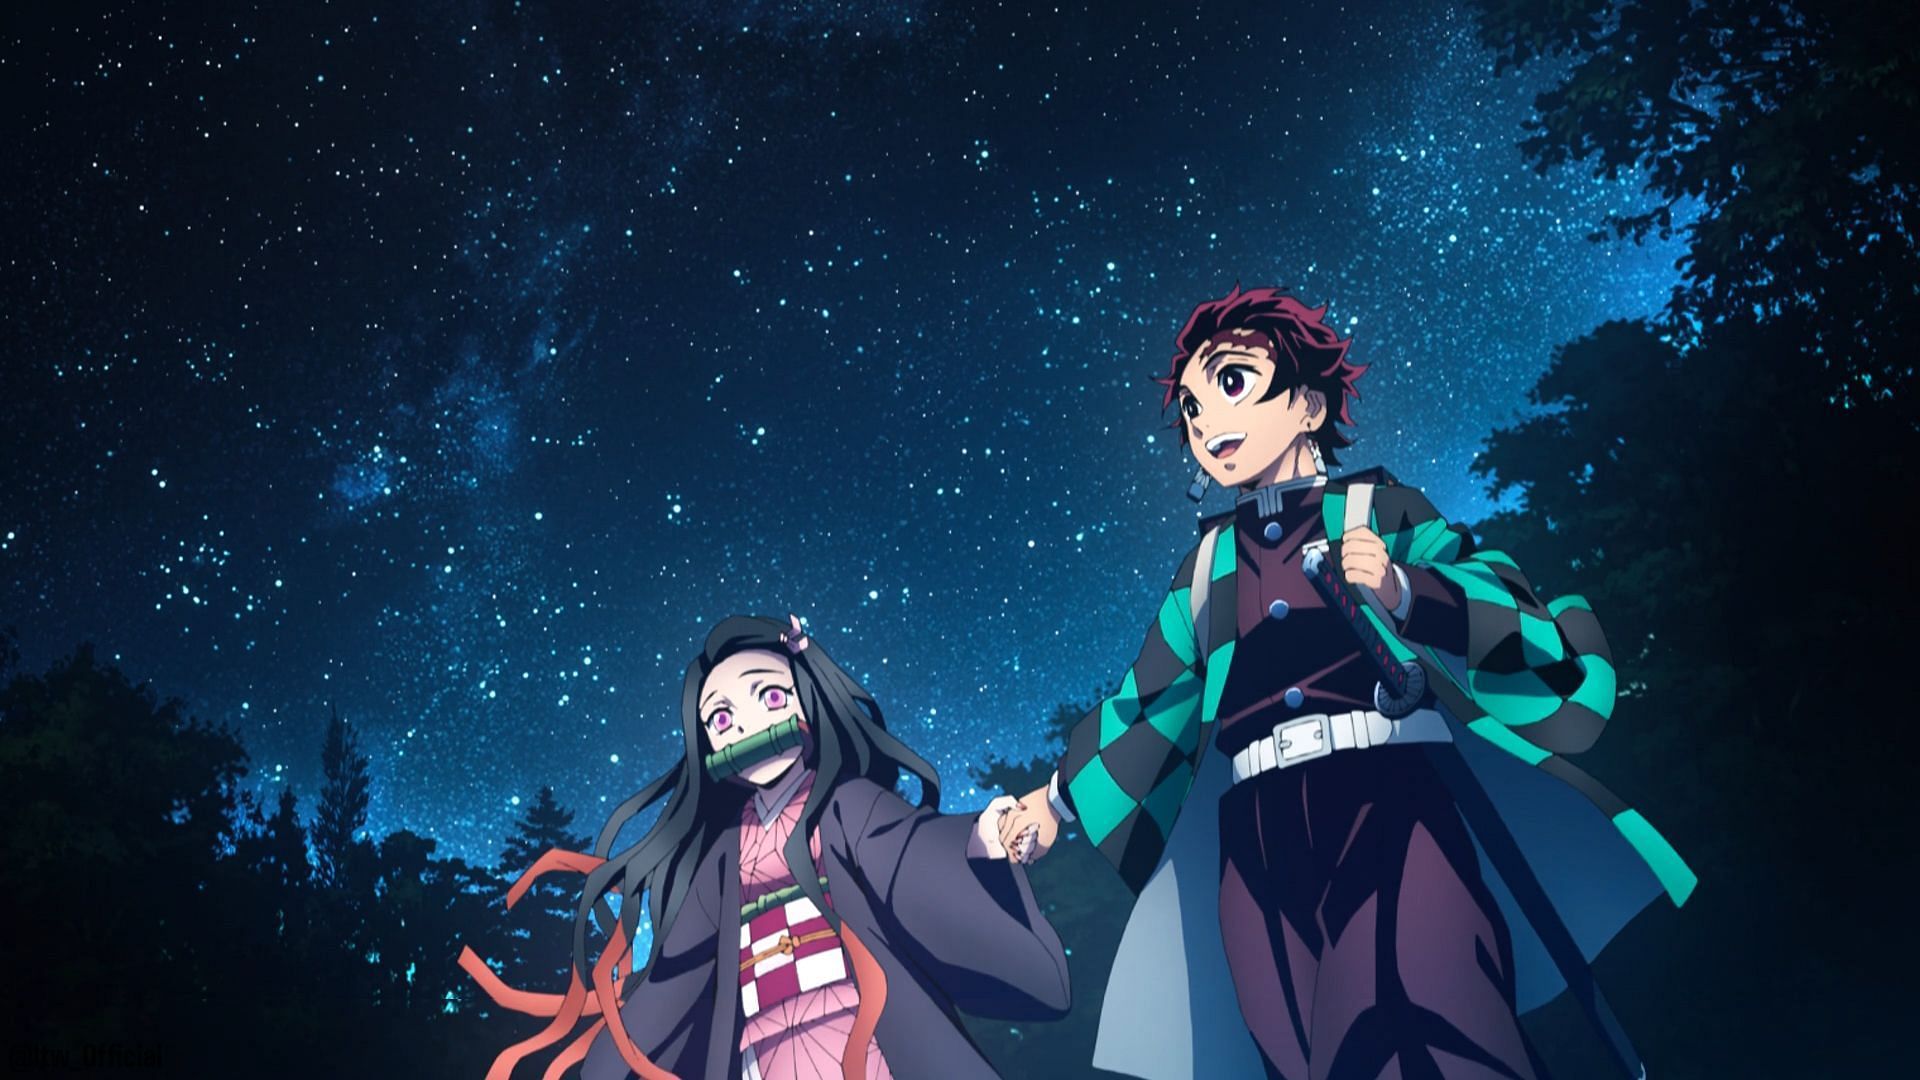 10 Most Popular Duos in Demon Slayer, Ranked from Absurd to Endearing